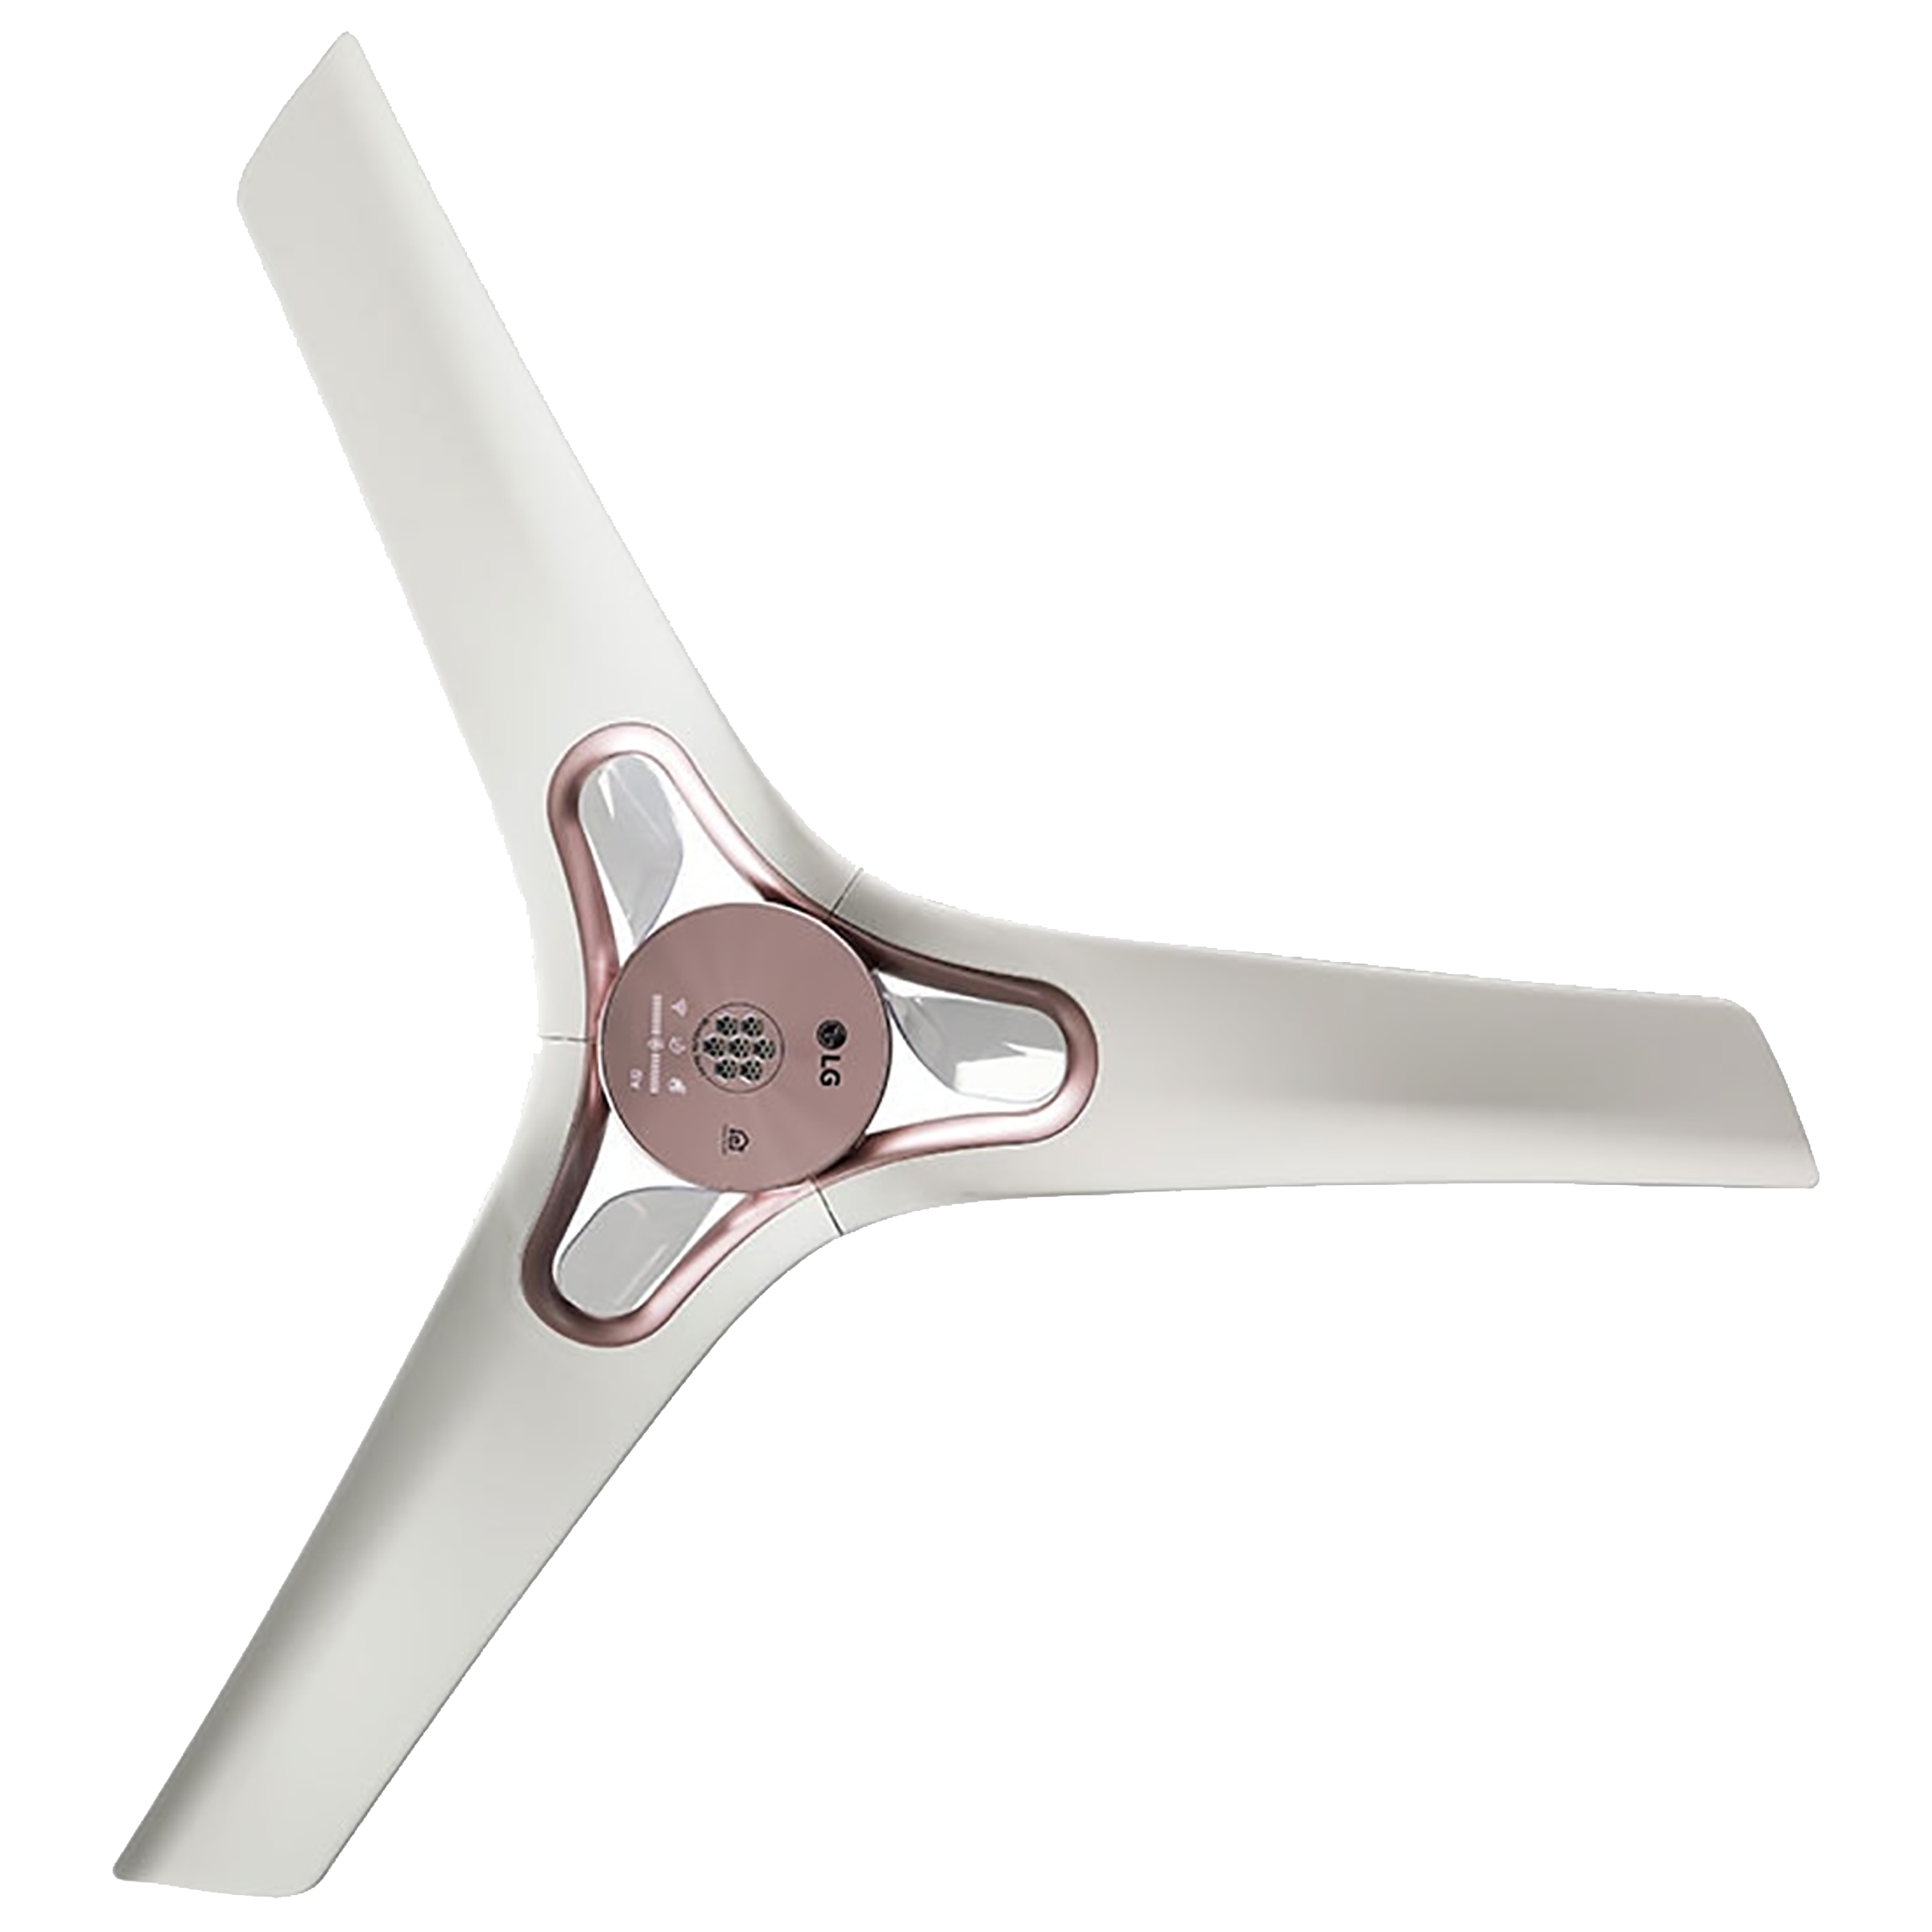 LG 120cm Sweep 3 Blade Ceiling Fan (Dual Wings for Natural Airflow, FC48GSPA1, Pink)_1